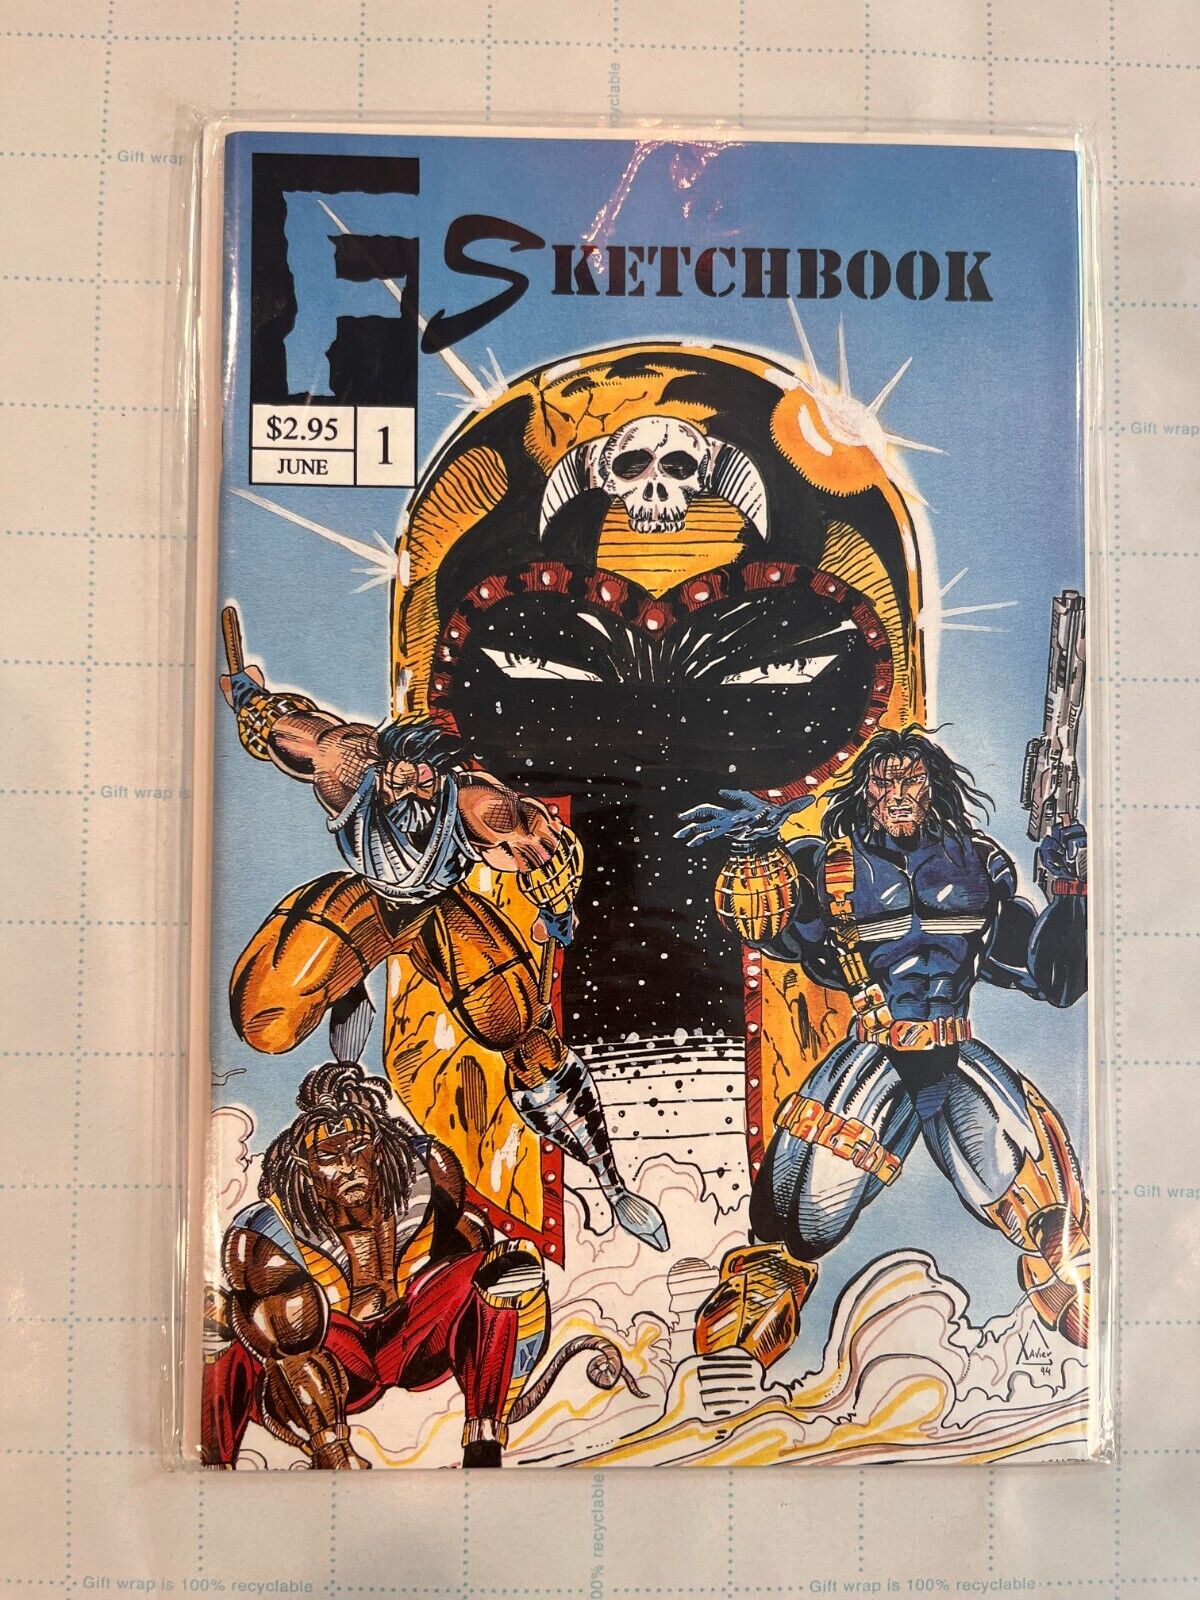 Sketchbook (Freelance, 1994) - HTF **Save with Combined Shipping**